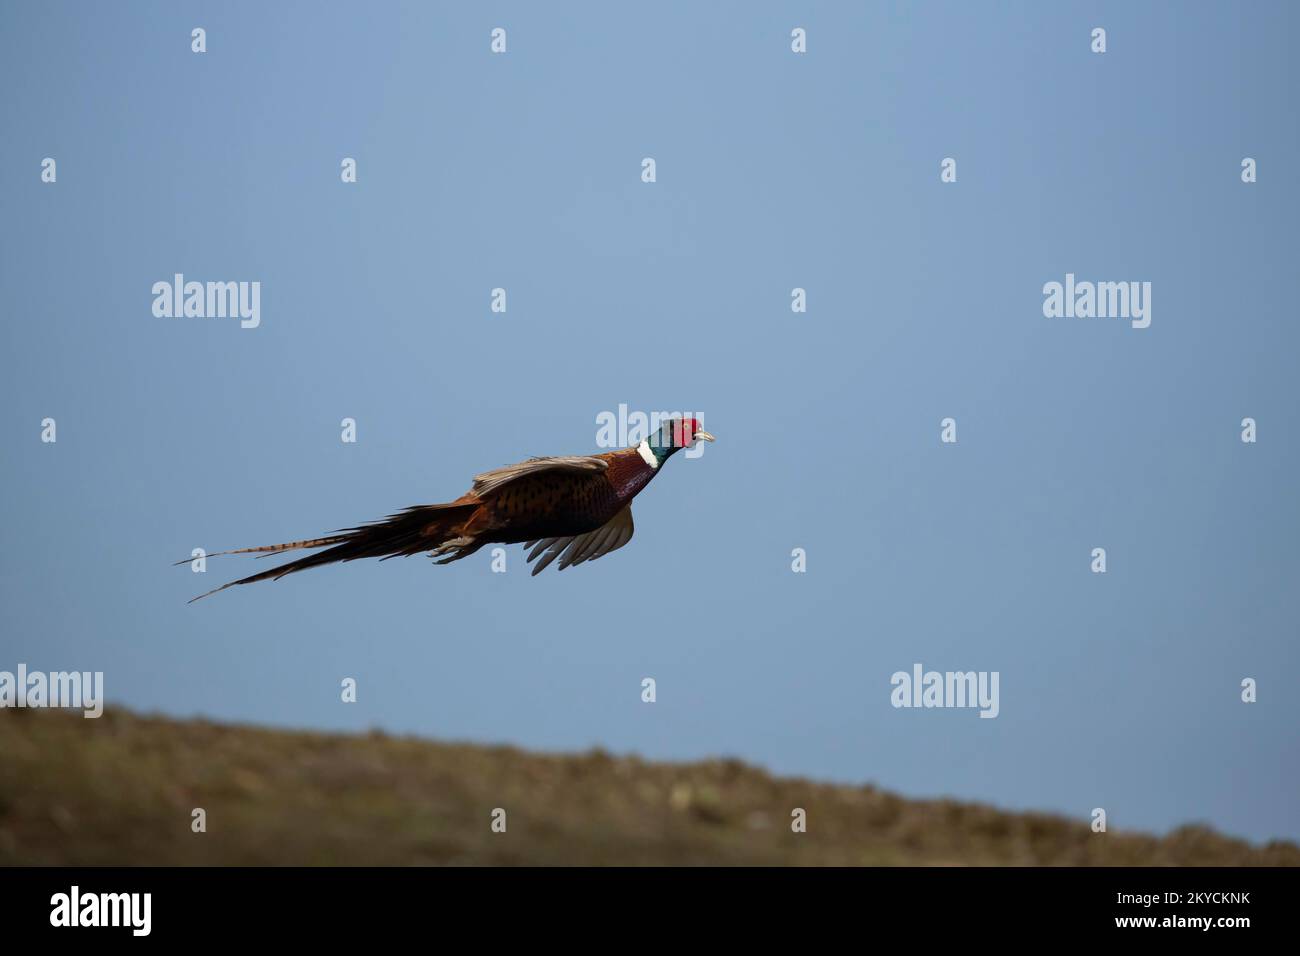 Common or Ring-necked pheasant (Phasianus colchicus) adult male bird in flight, Suffolk, England, United Kingdom Stock Photo